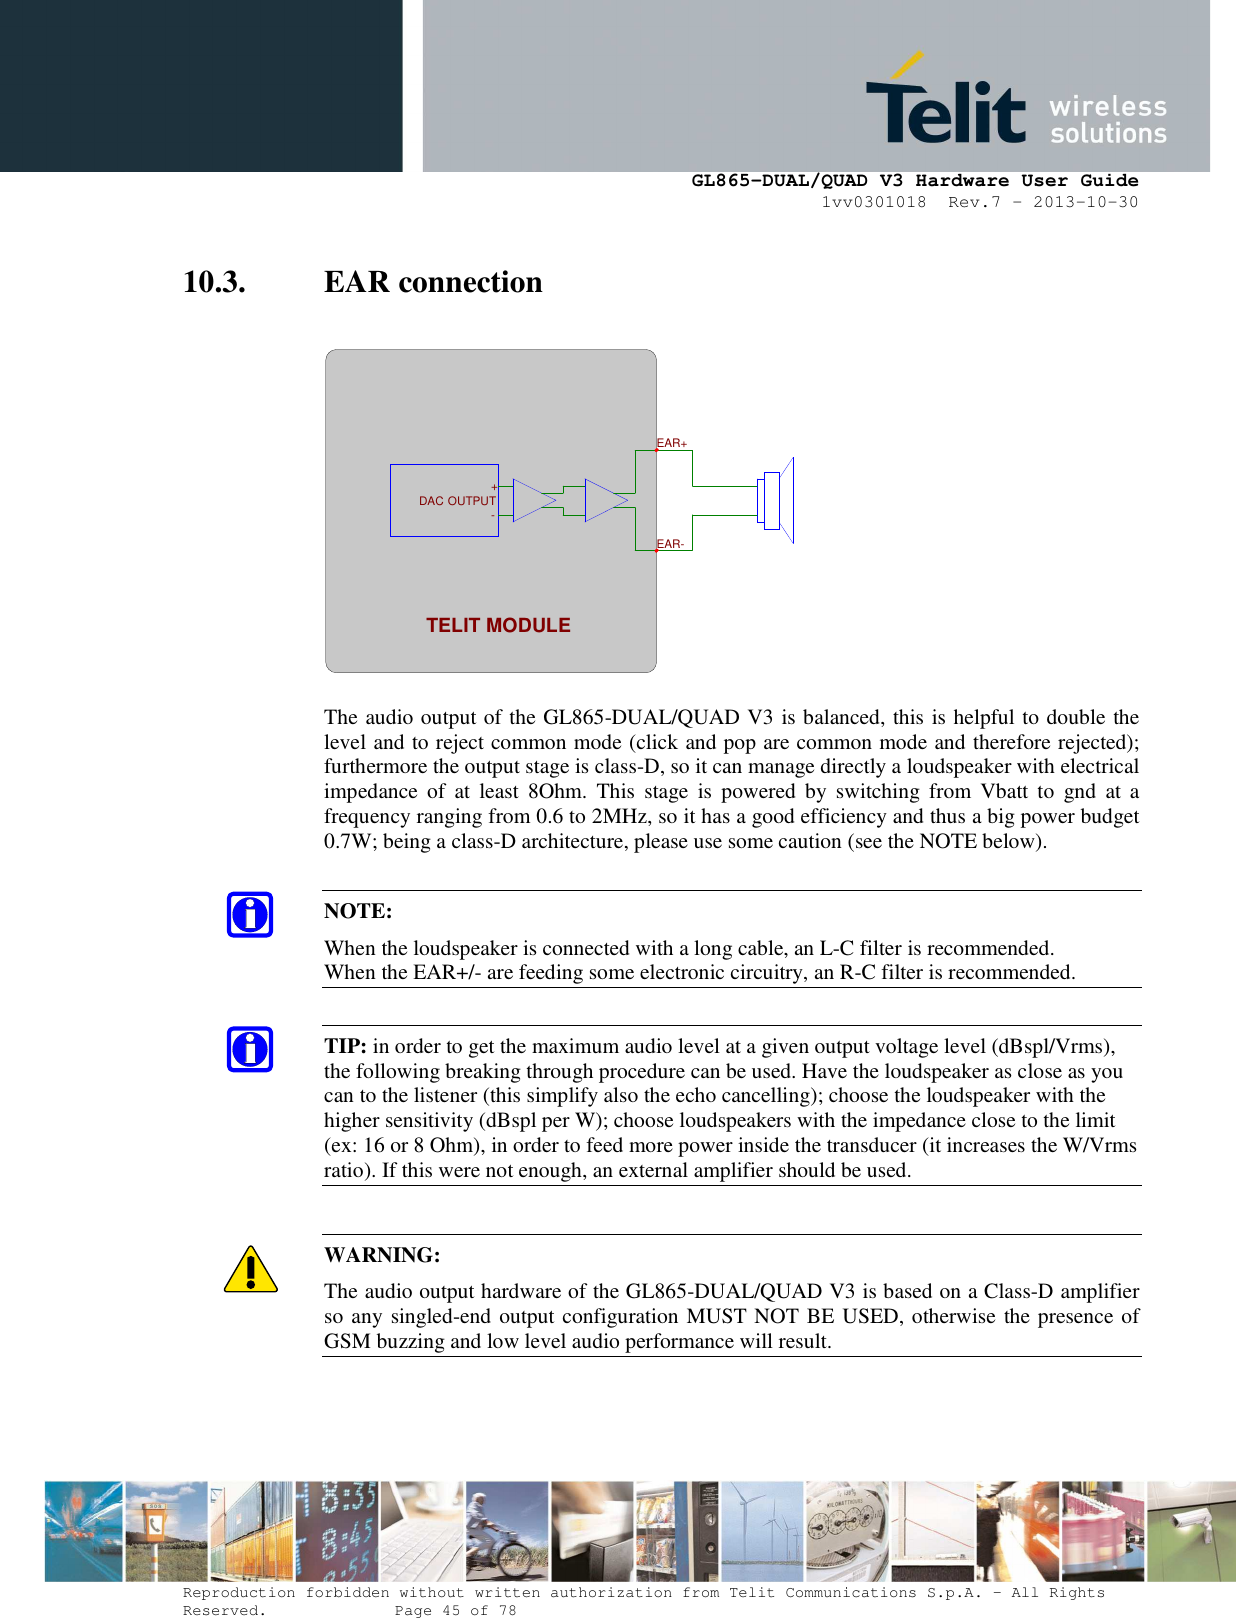      GL865-DUAL/QUAD V3 Hardware User Guide 1vv0301018  Rev.7 – 2013-10-30  Reproduction forbidden without written authorization from Telit Communications S.p.A. - All Rights Reserved.    Page 45 of 78 Mod. 0805 2011-07 Rev.2 10.3. EAR connection    The audio output of the GL865-DUAL/QUAD V3 is balanced, this is helpful to double the level and to reject common mode (click and pop are common mode and therefore rejected); furthermore the output stage is class-D, so it can manage directly a loudspeaker with electrical impedance  of  at  least  8Ohm.  This  stage  is  powered  by  switching  from  Vbatt  to  gnd  at a frequency ranging from 0.6 to 2MHz, so it has a good efficiency and thus a big power budget 0.7W; being a class-D architecture, please use some caution (see the NOTE below).  NOTE: When the loudspeaker is connected with a long cable, an L-C filter is recommended. When the EAR+/- are feeding some electronic circuitry, an R-C filter is recommended.  TIP: in order to get the maximum audio level at a given output voltage level (dBspl/Vrms), the following breaking through procedure can be used. Have the loudspeaker as close as you can to the listener (this simplify also the echo cancelling); choose the loudspeaker with the higher sensitivity (dBspl per W); choose loudspeakers with the impedance close to the limit (ex: 16 or 8 Ohm), in order to feed more power inside the transducer (it increases the W/Vrms ratio). If this were not enough, an external amplifier should be used.  WARNING: The audio output hardware of the GL865-DUAL/QUAD V3 is based on a Class-D amplifier so any singled-end output configuration MUST NOT BE USED, otherwise the presence of GSM buzzing and low level audio performance will result.      EAR+EAR-TELIT MODULE-+ OUTPUTDAC